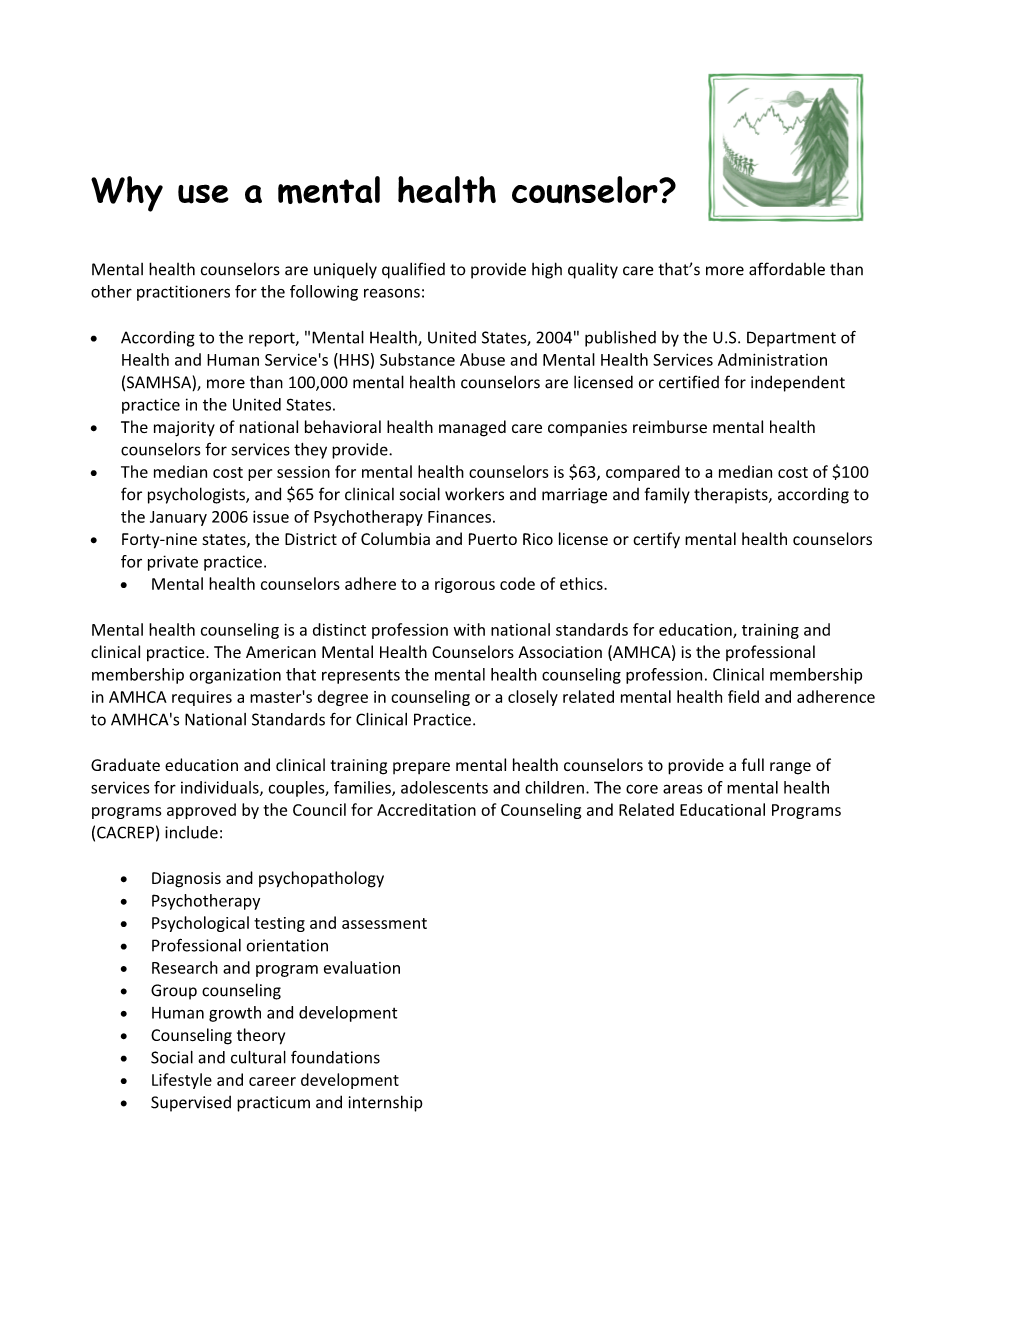 Why Use a Mental Health Counselor